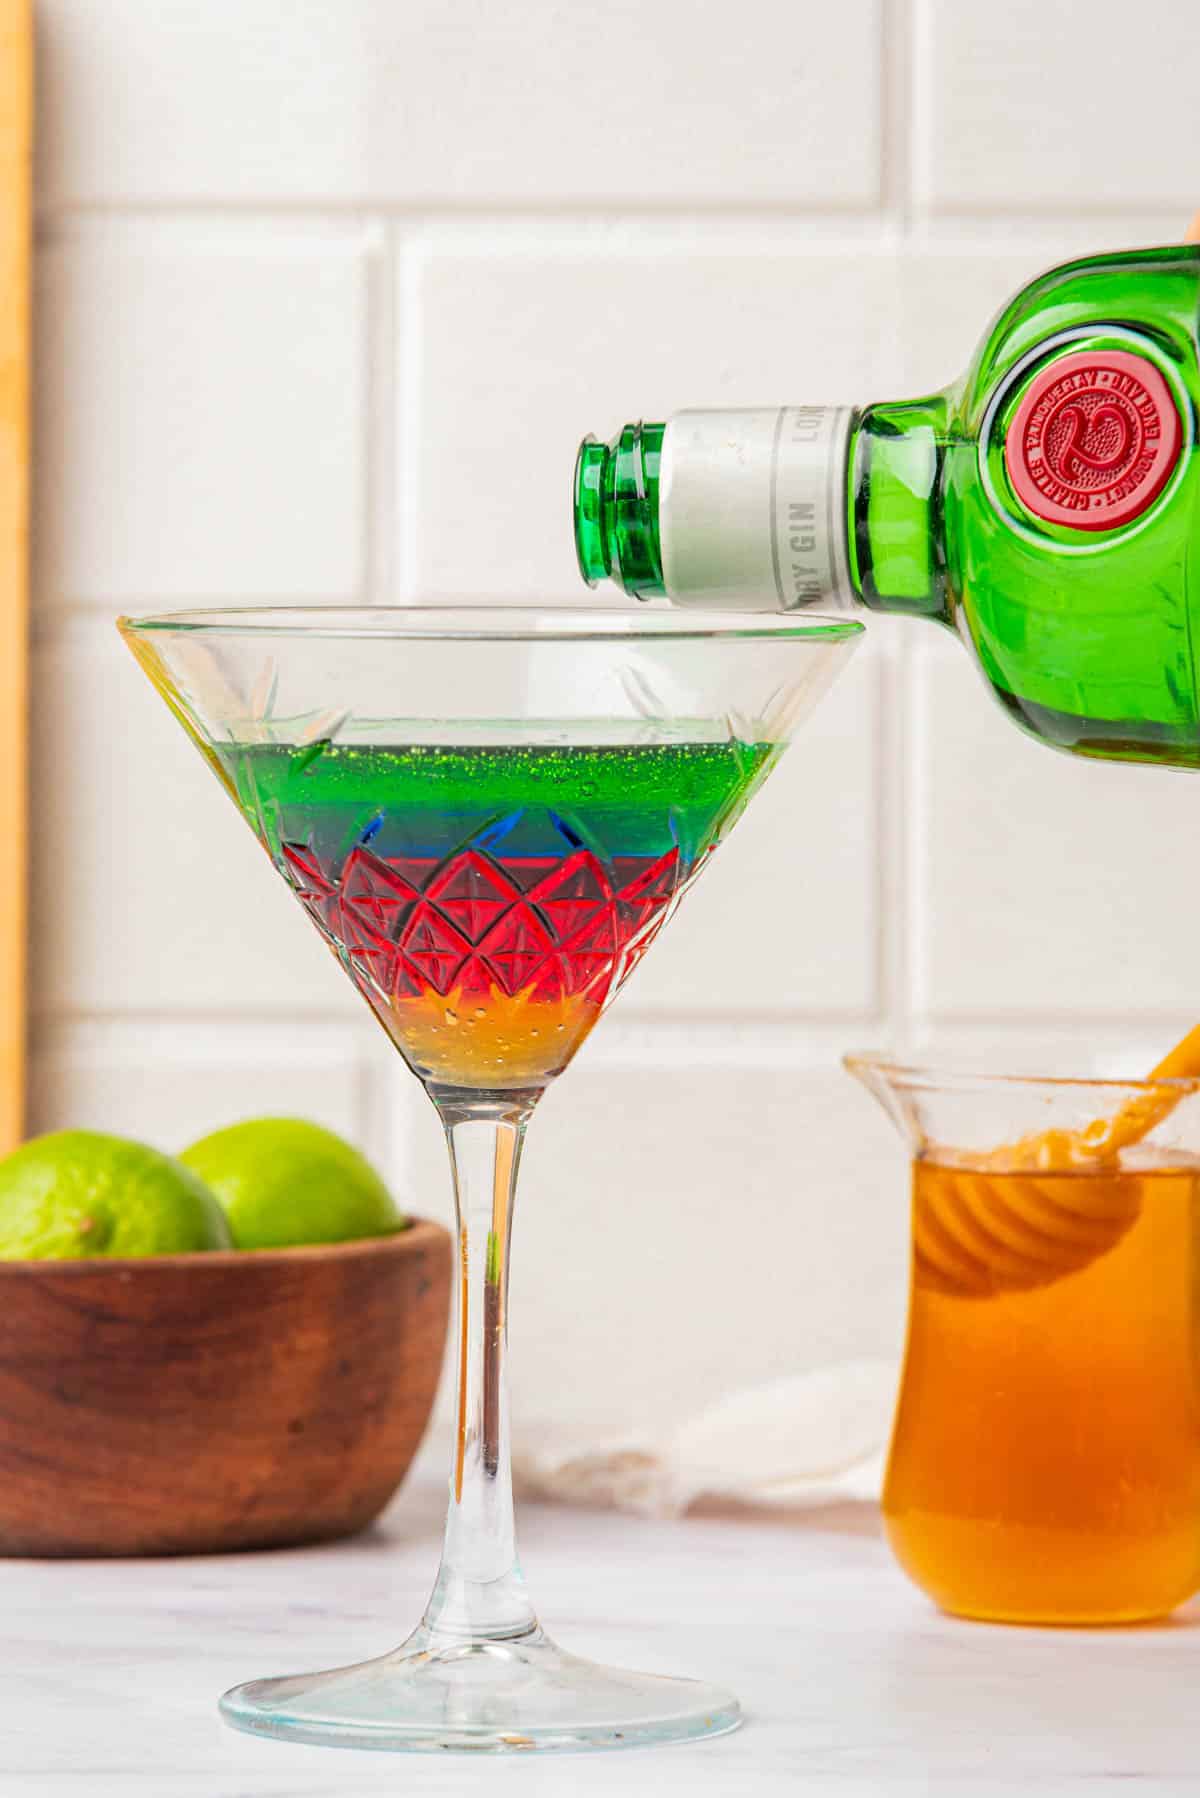 Pouring gin into a martini glass with liquid in the colors of the Olympic Rings with a jigger on side, limes, bottles, and honey in background.